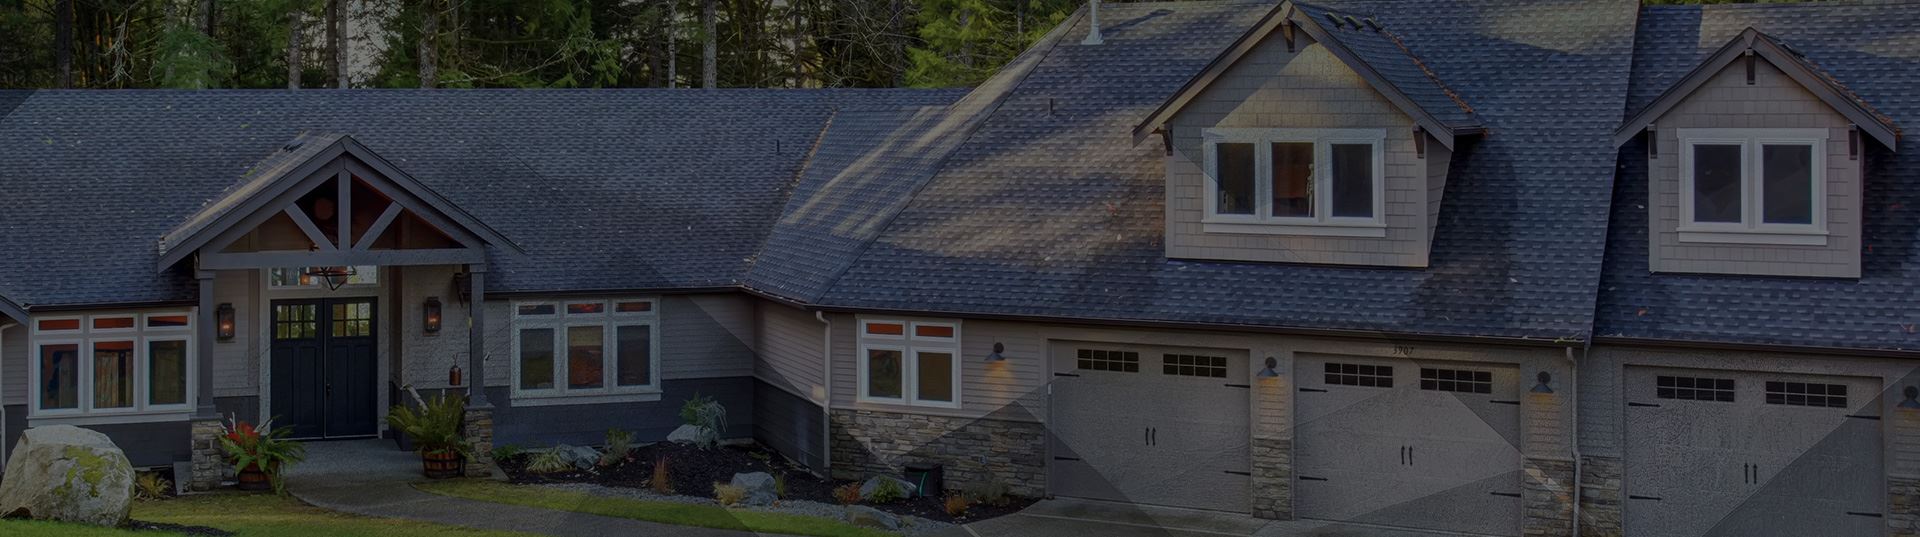 Hartford Roof Inspection Services | HAAG Certified